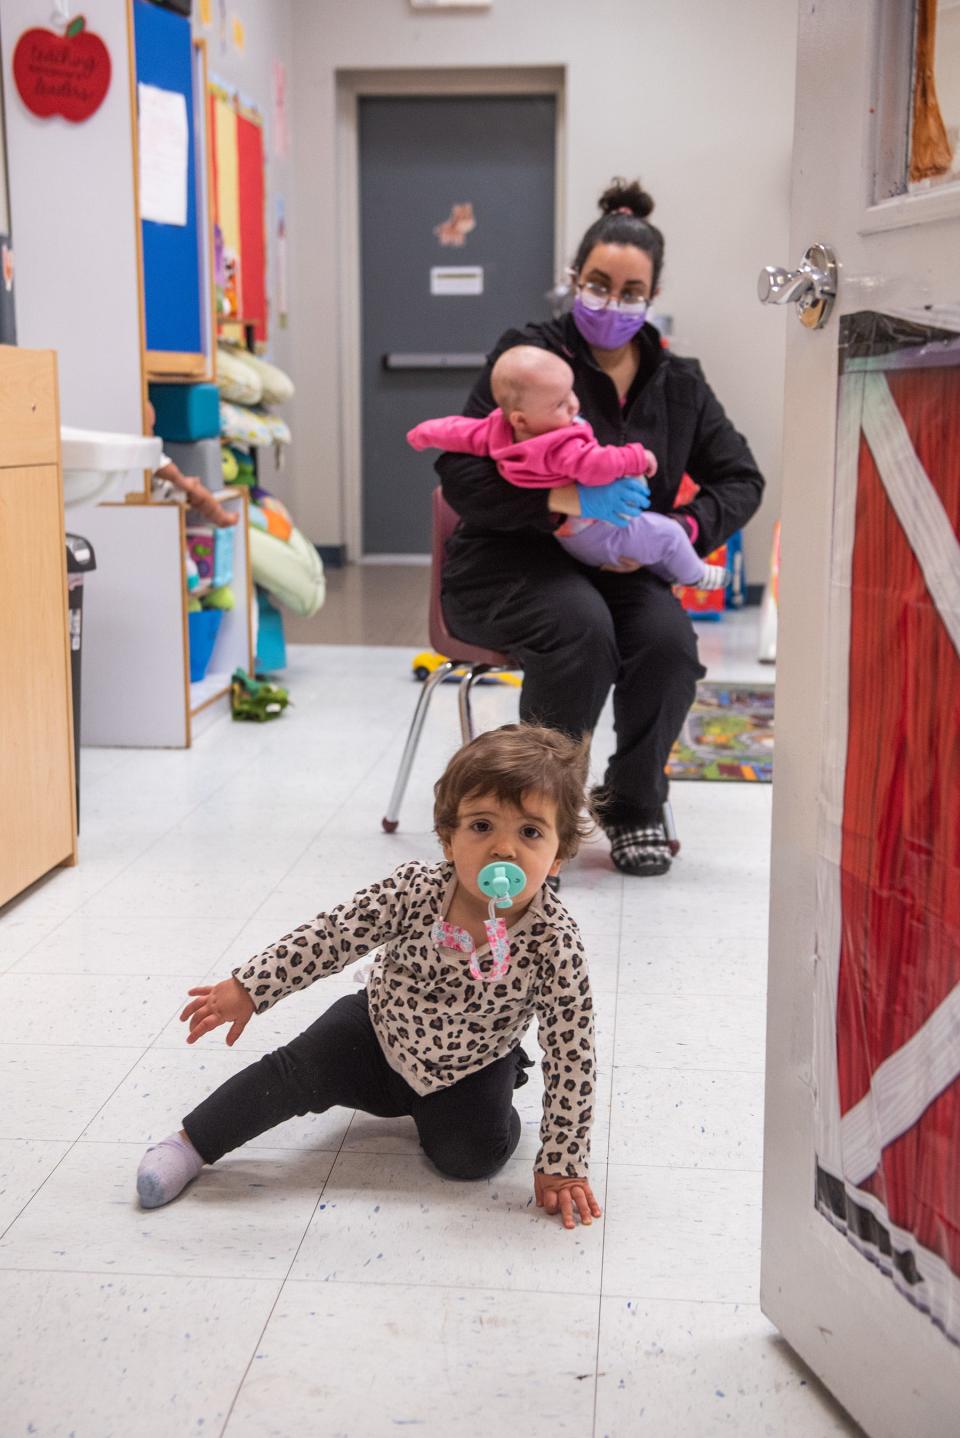 Emily Healy, 11 months old, crawls toward the door as caretaker Briana Diaz holds baby Emma Engel, 5 months old, at Victoria's Castle Daycare in New Windsor on January 21, 2022.